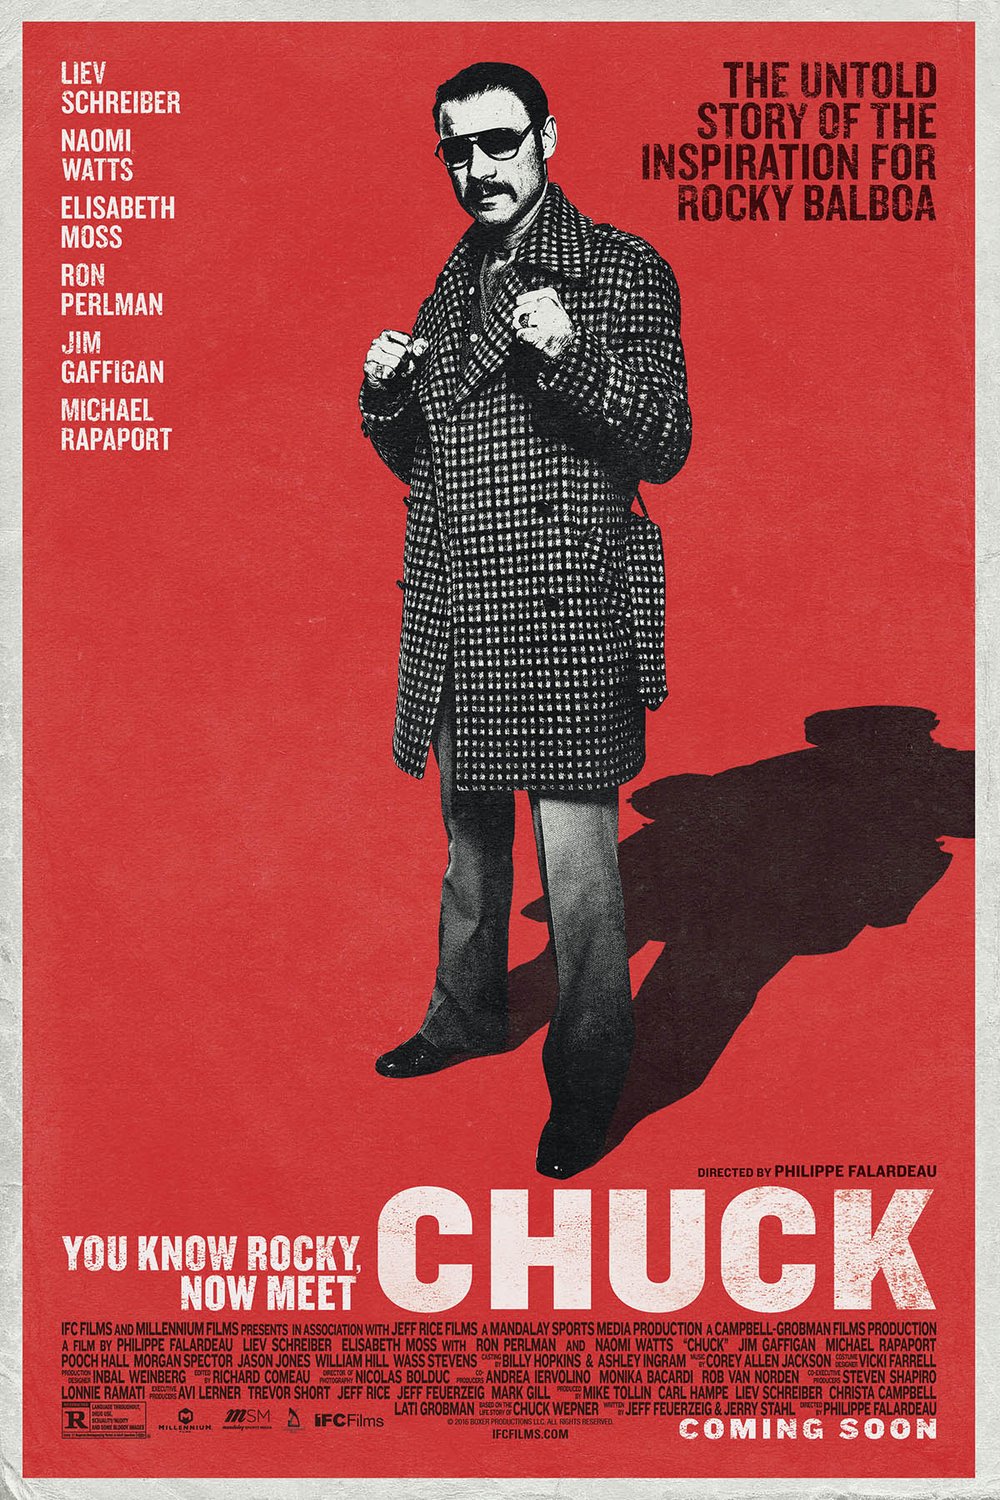 Poster of the movie Chuck